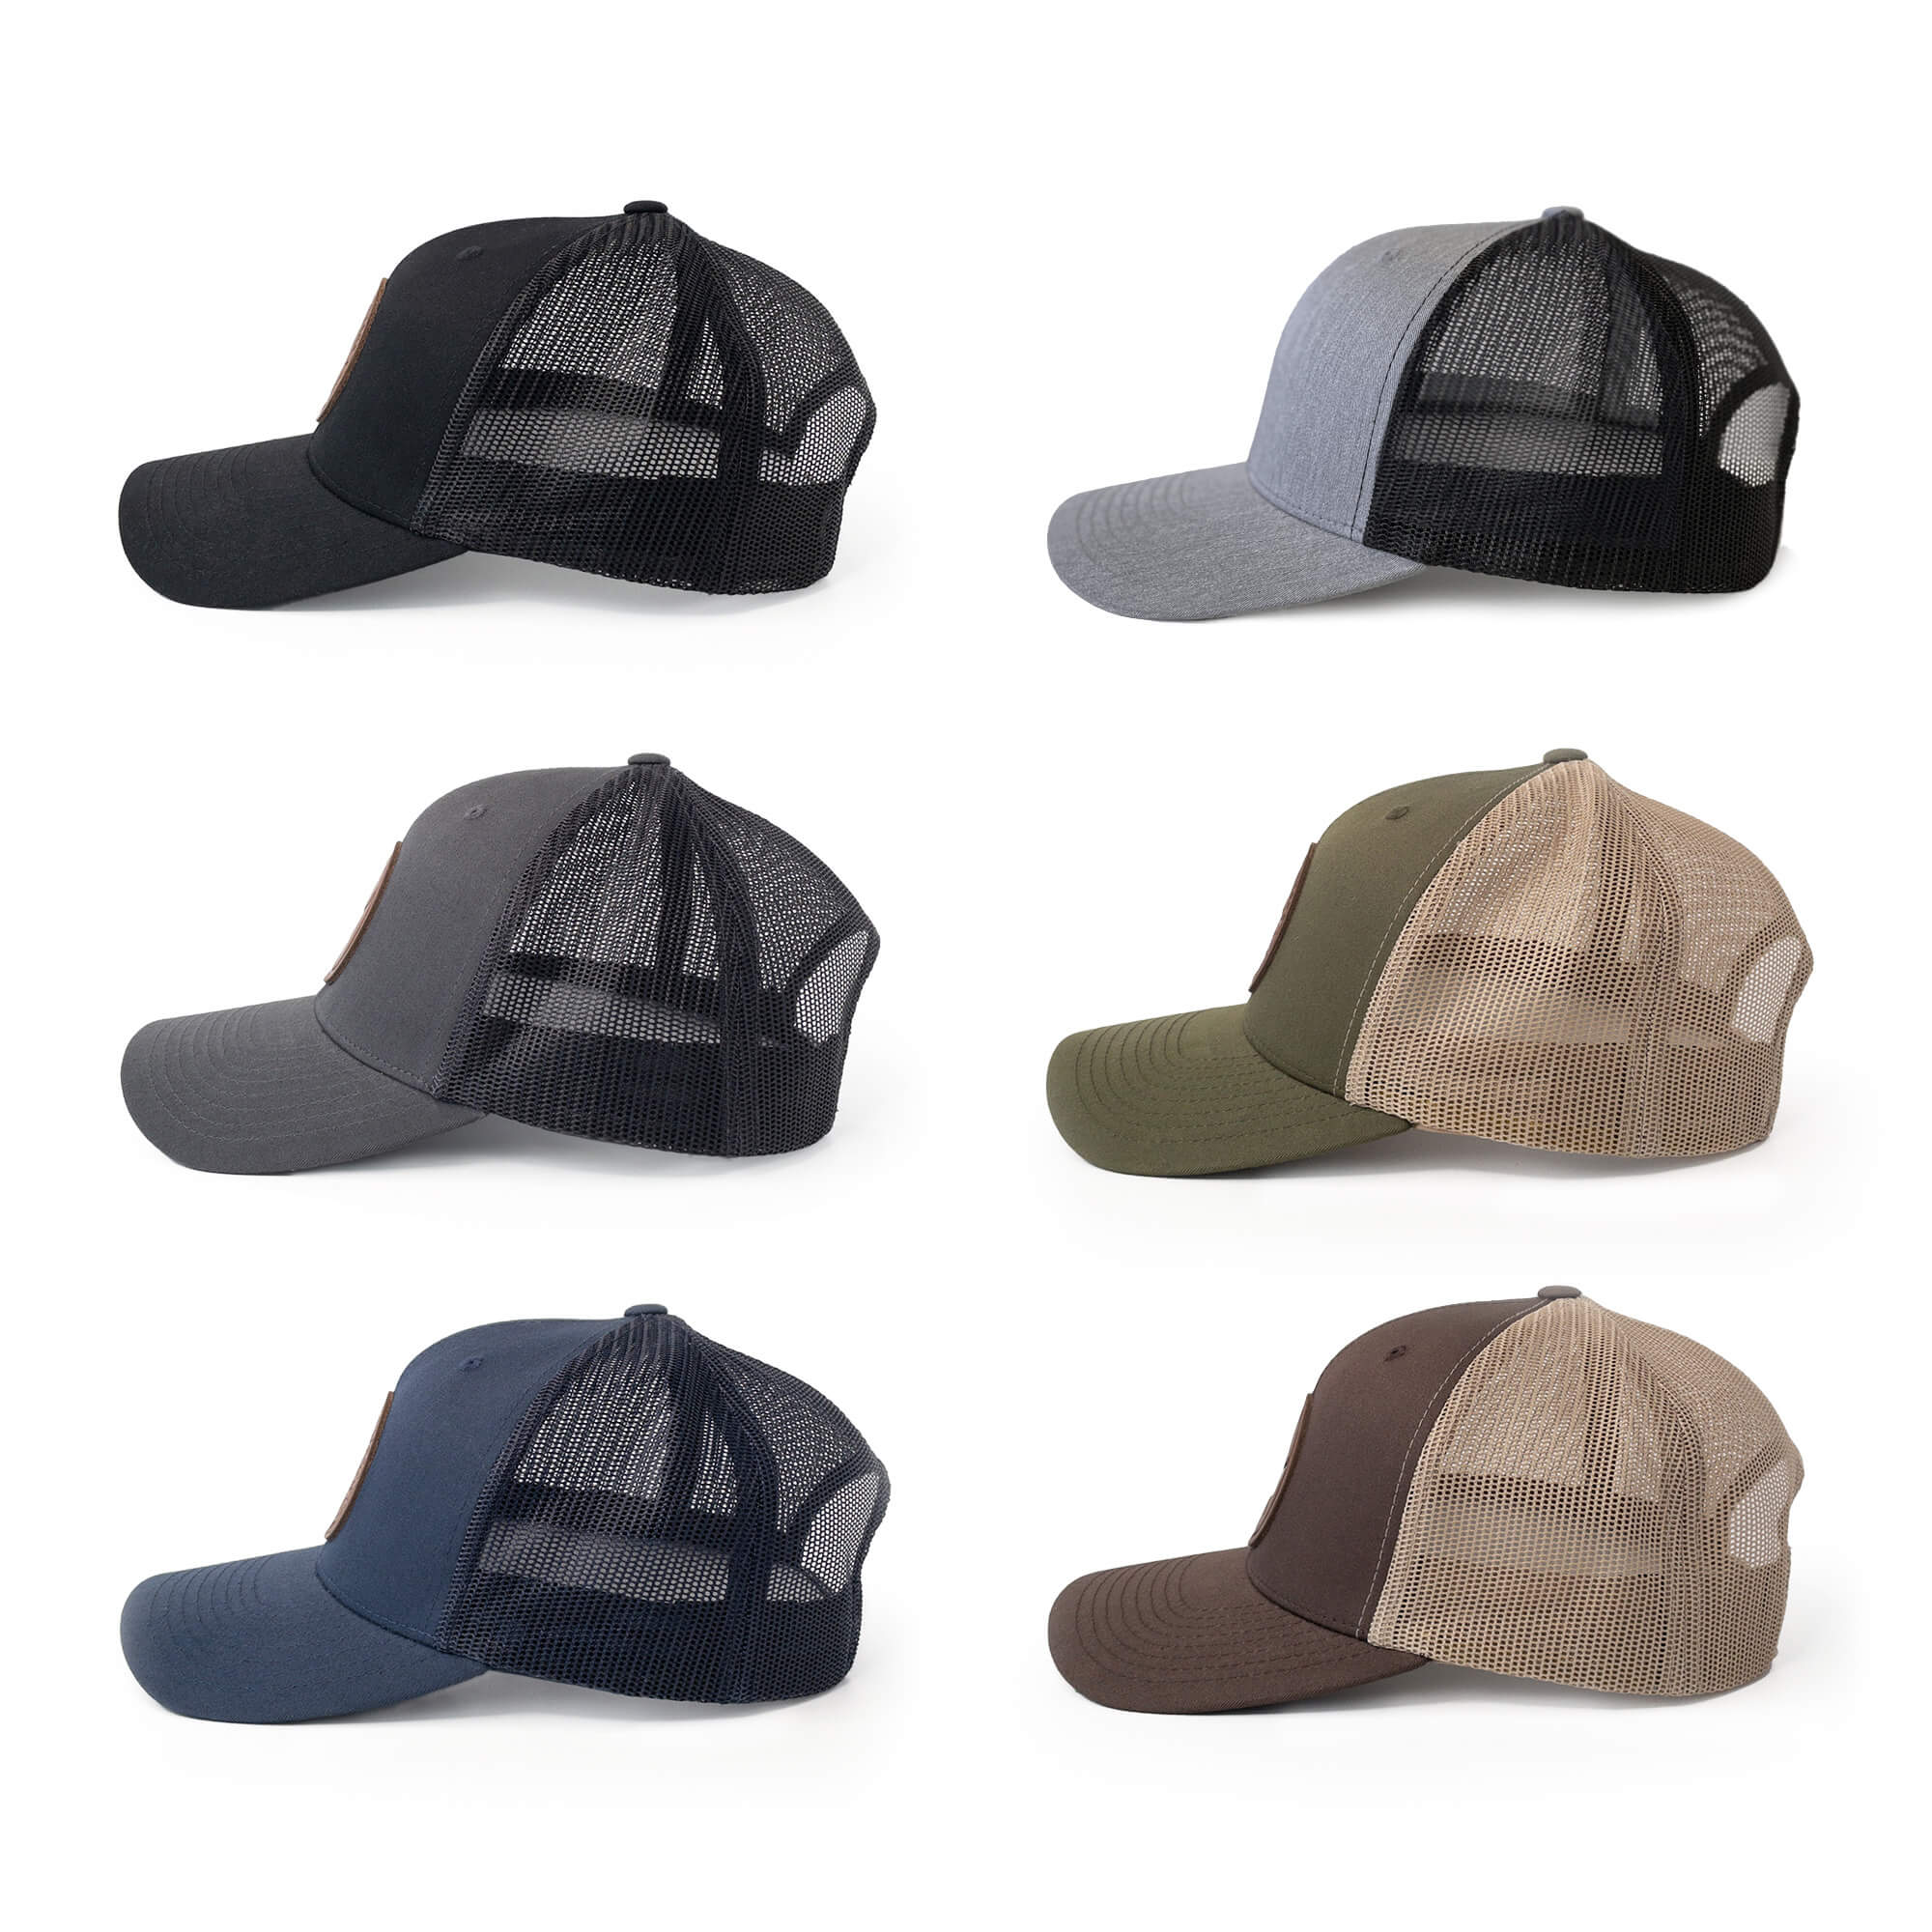 Leather patch trucker hats available in 6 colors | BLACK-004-007, CHARC-004-007, NAVY-004-007, HGREY-004-007, MOSS-004-007, BROWN-004-007